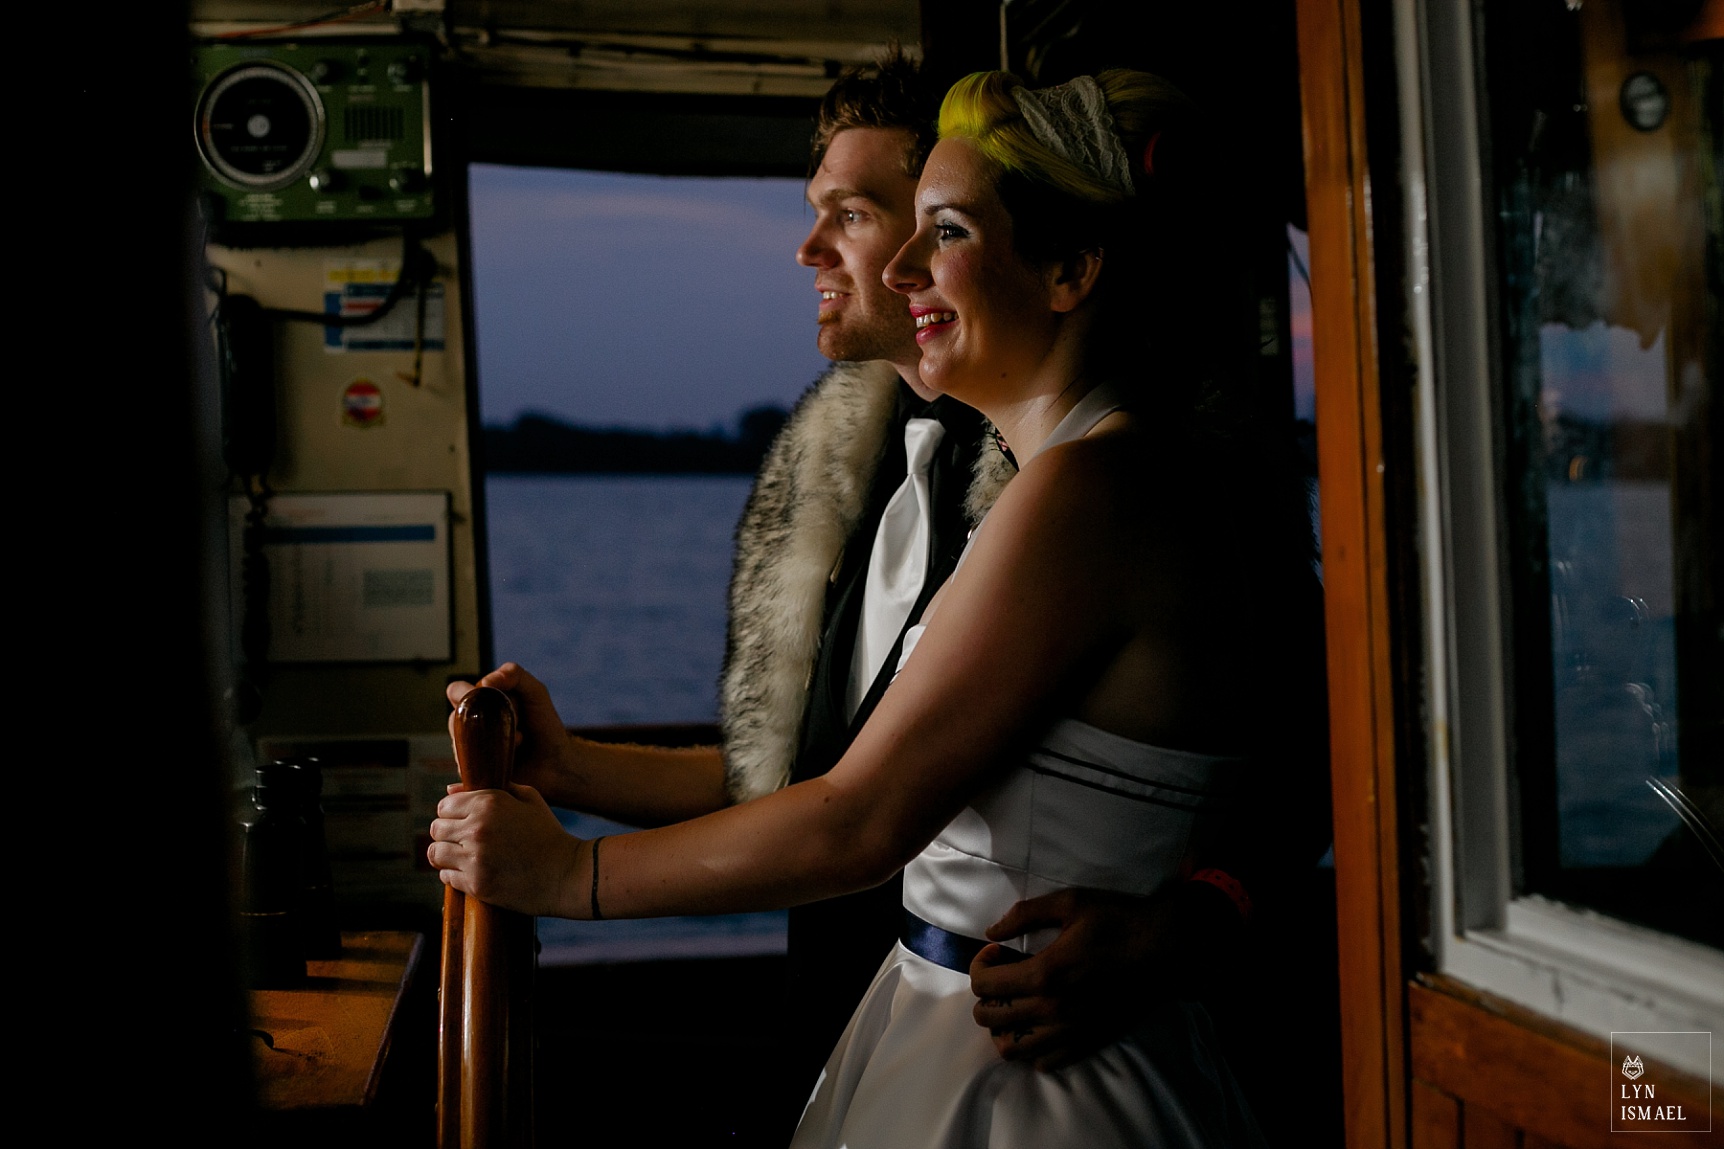 Bride and groom learns how to steer the Empire Sandy tall ship.